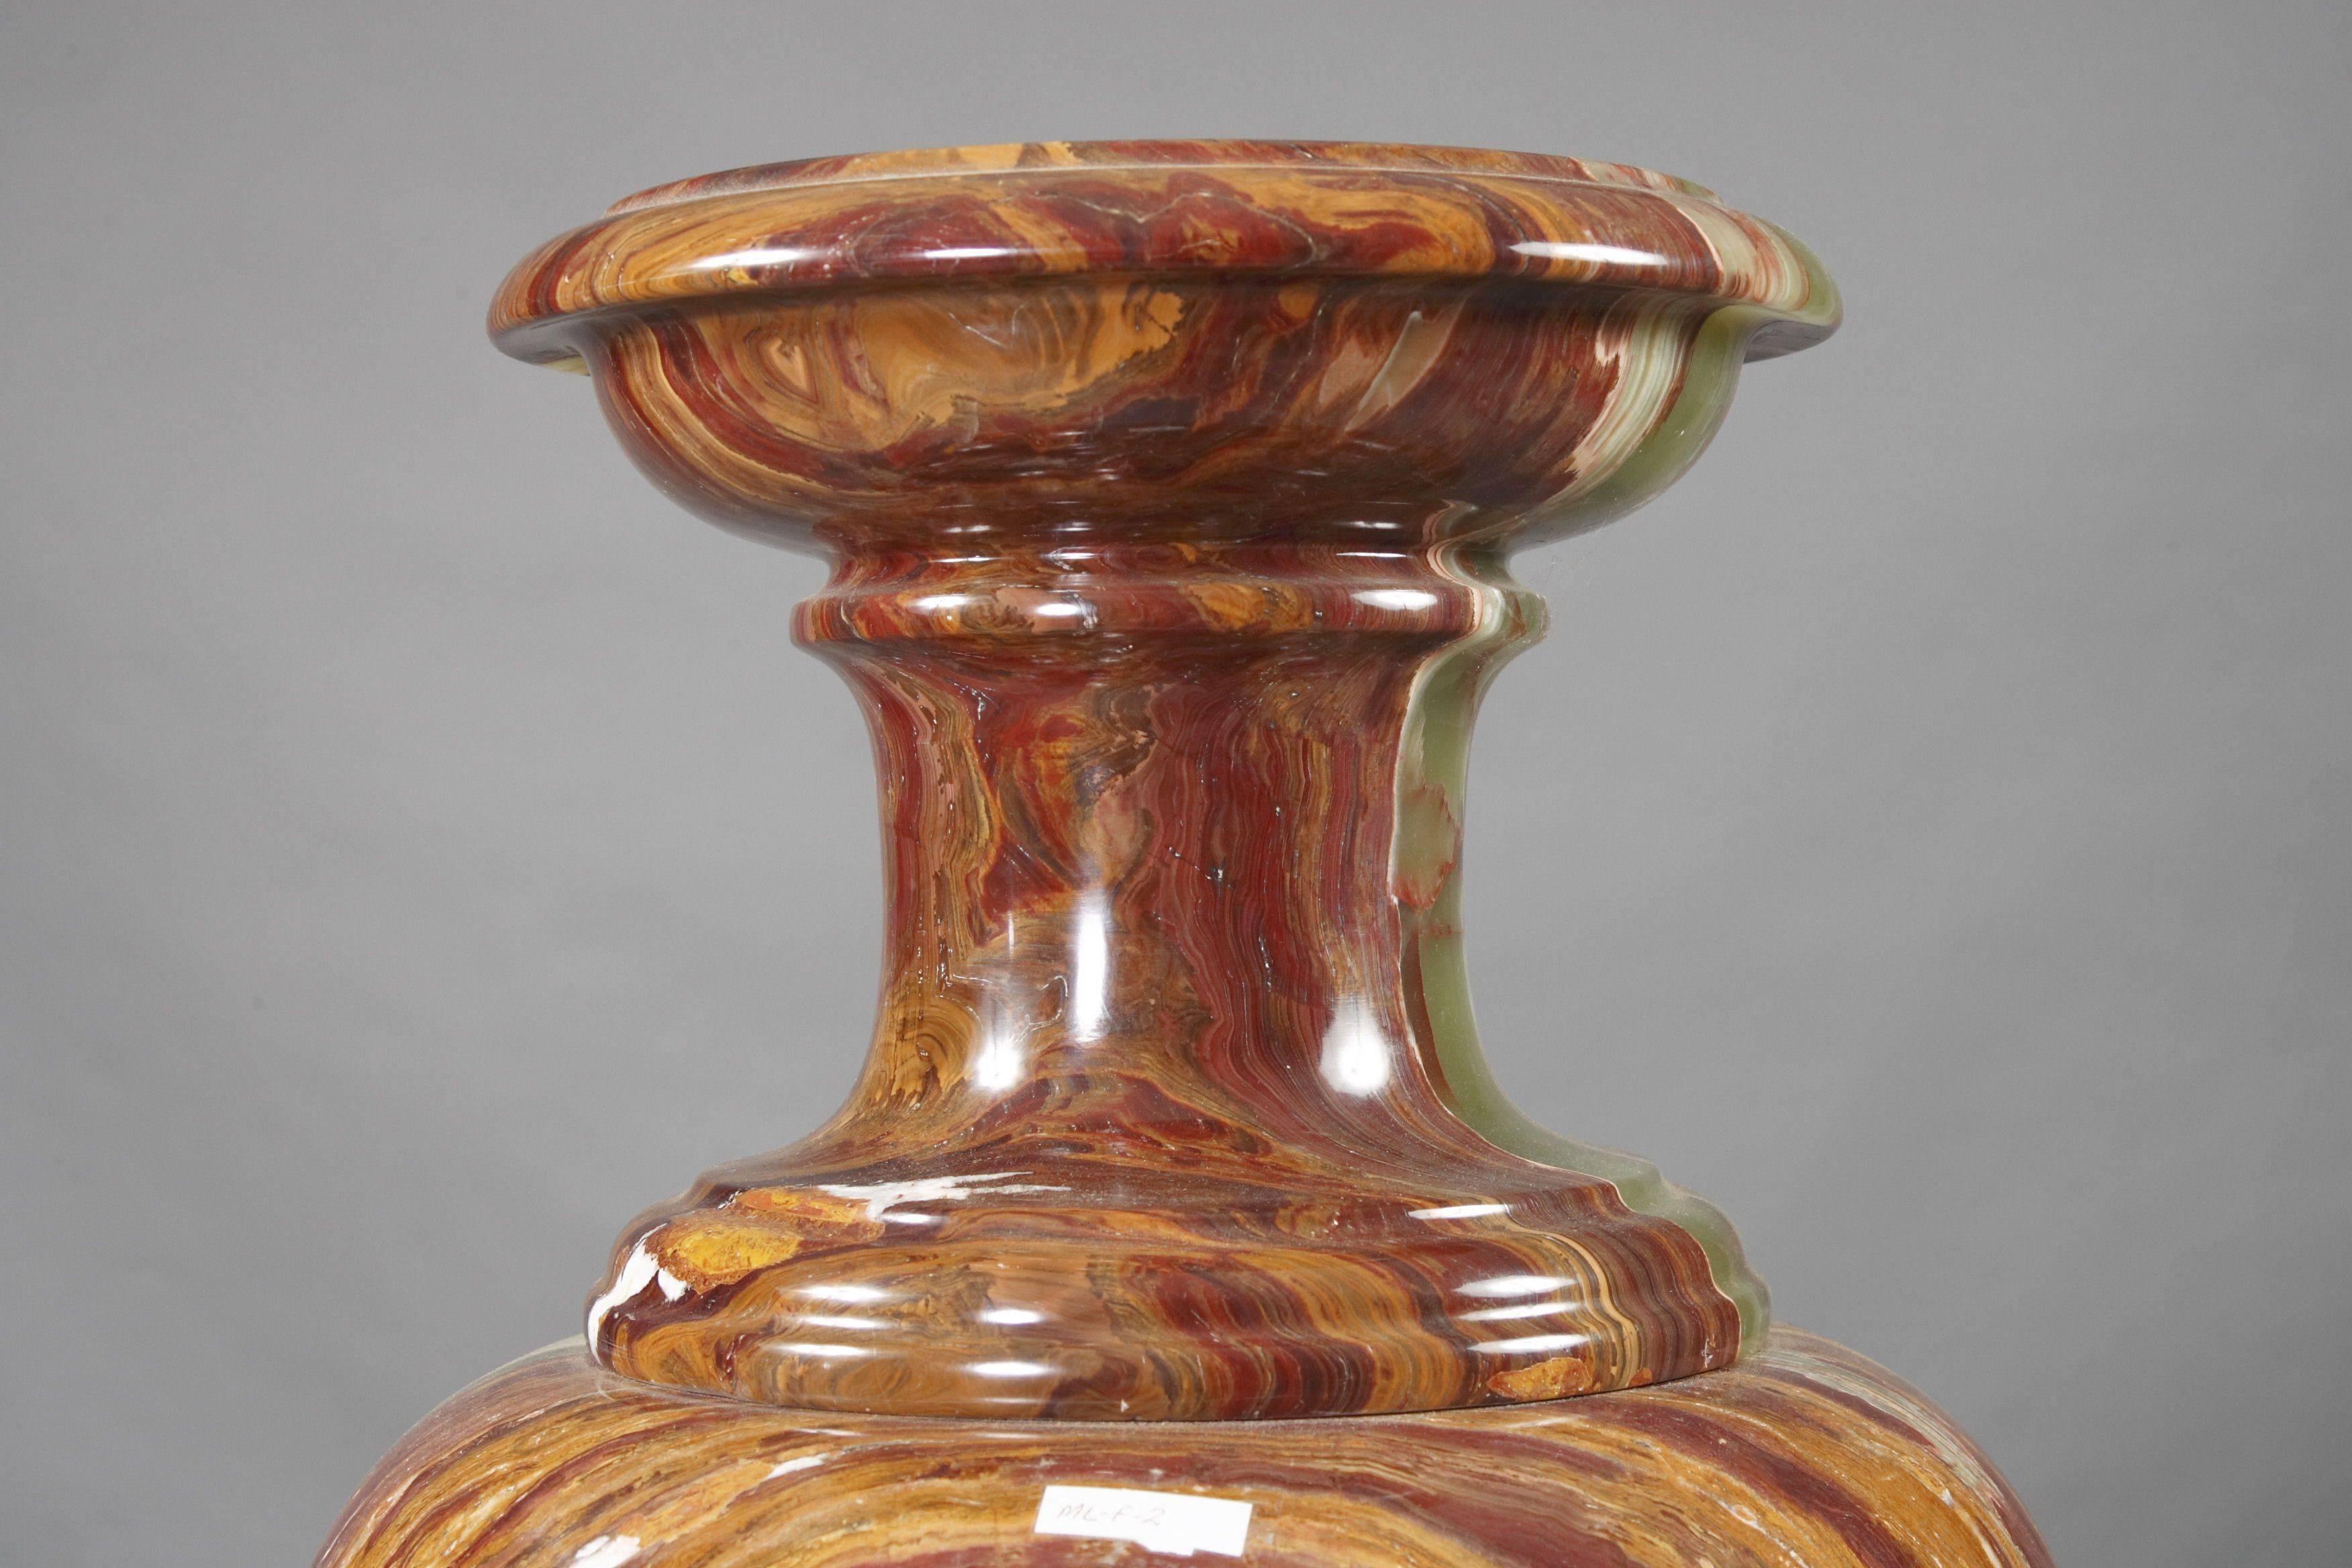 Neoclassical 20th Century Classicist Style in Red-Onyx Marble Crater Vase